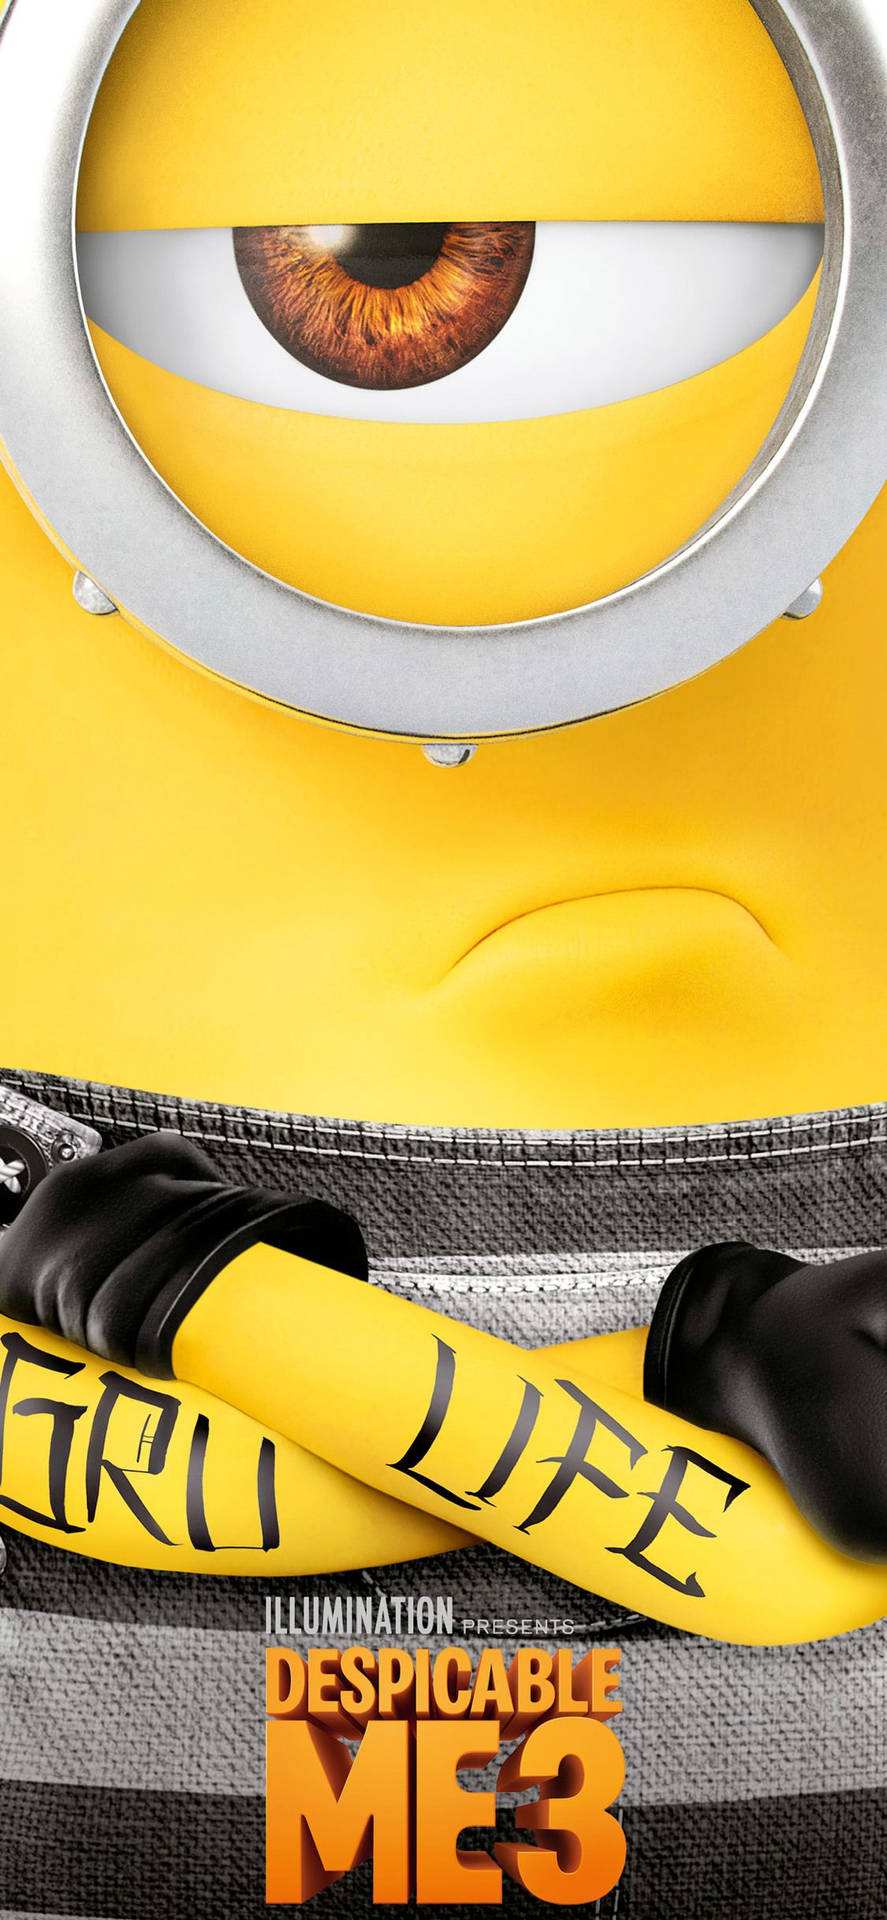 Despicable Me 3 Poster Background